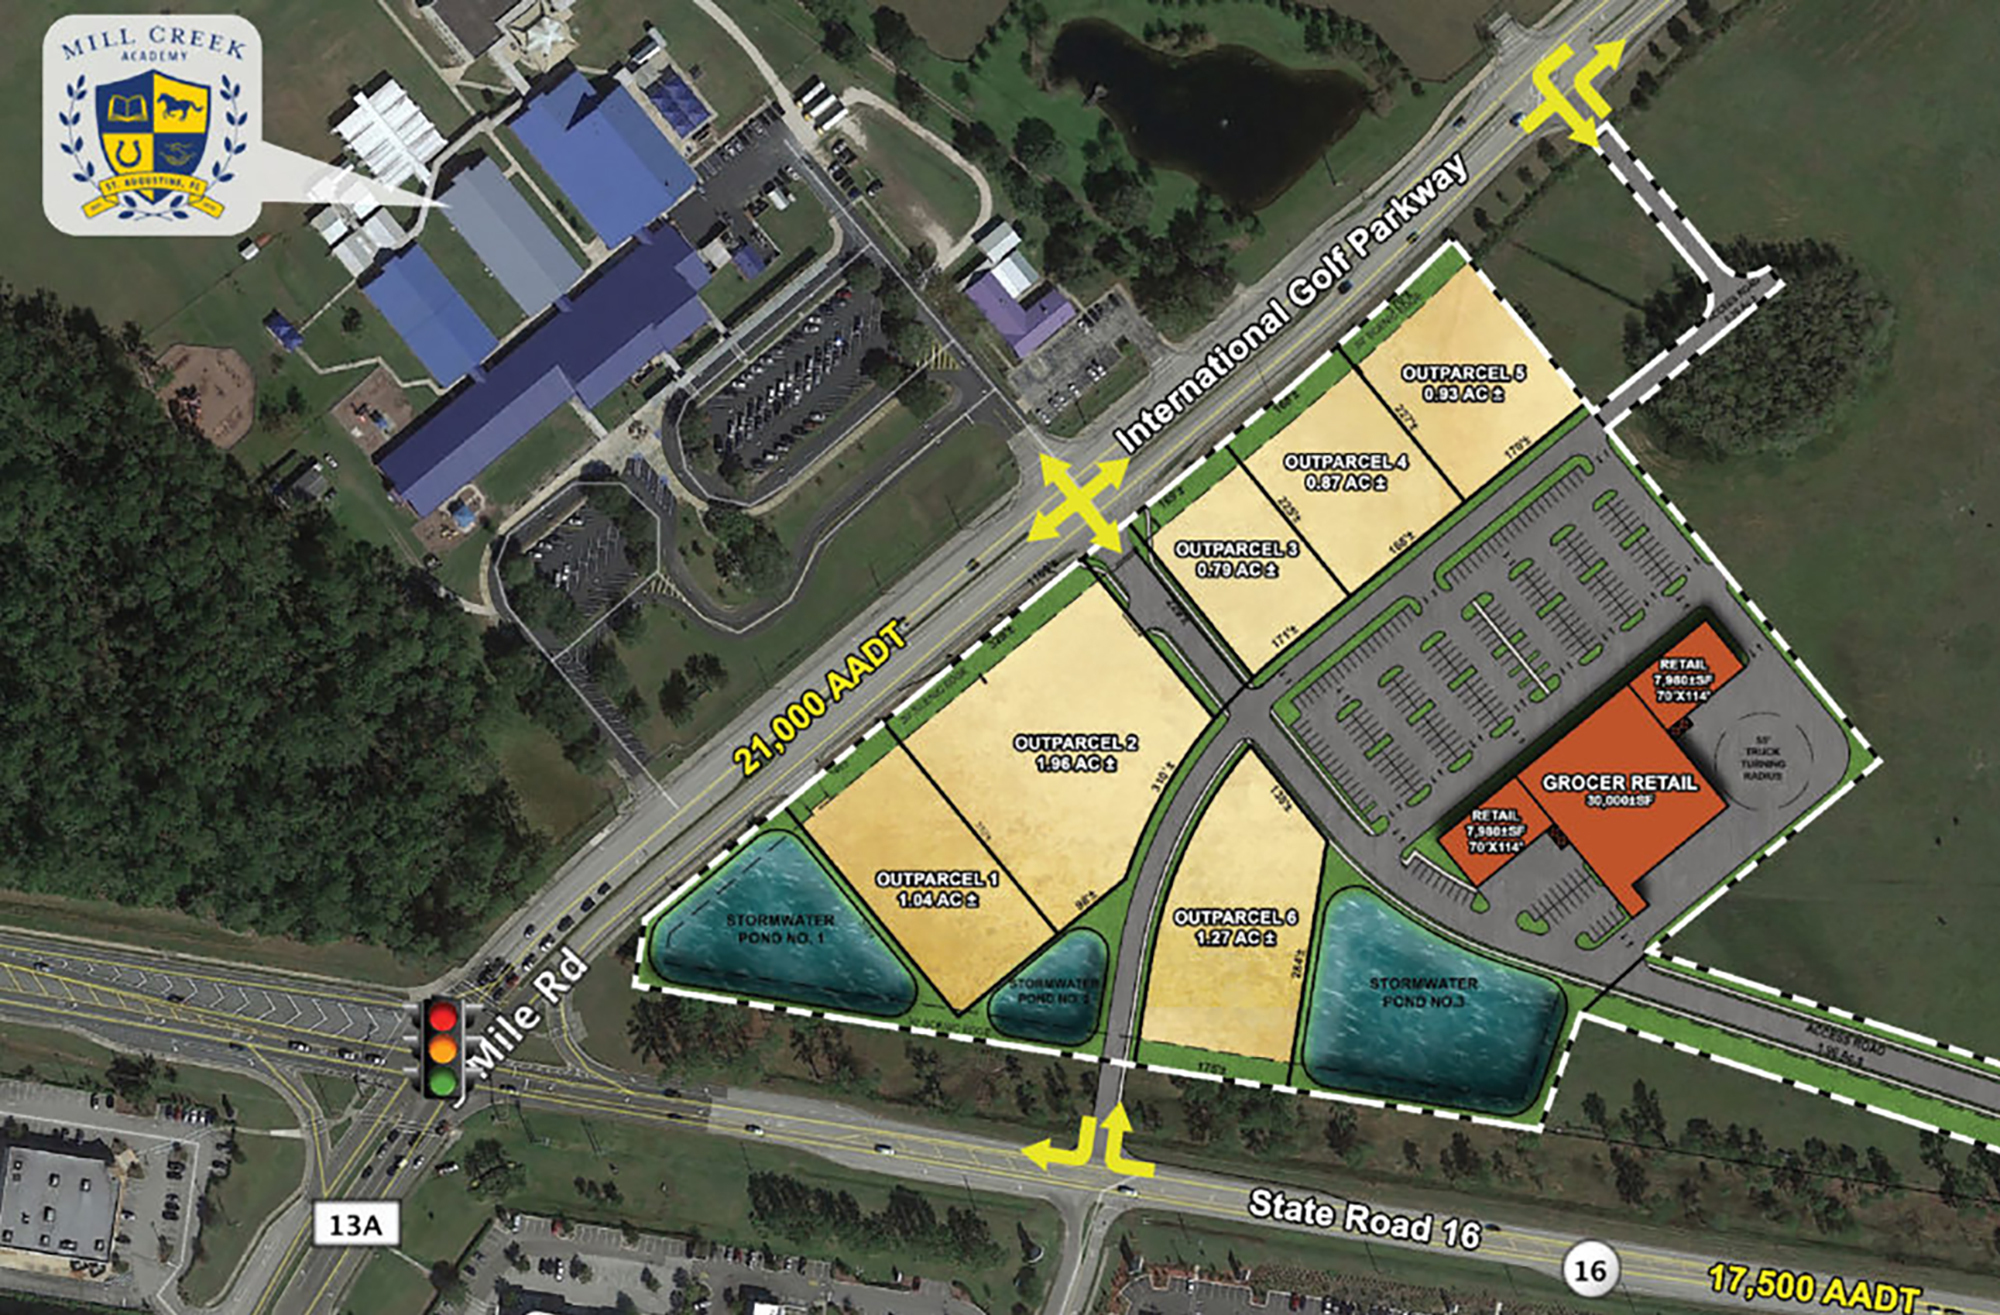 The site plan for the Parkway Shoppes at World Commerce Center.